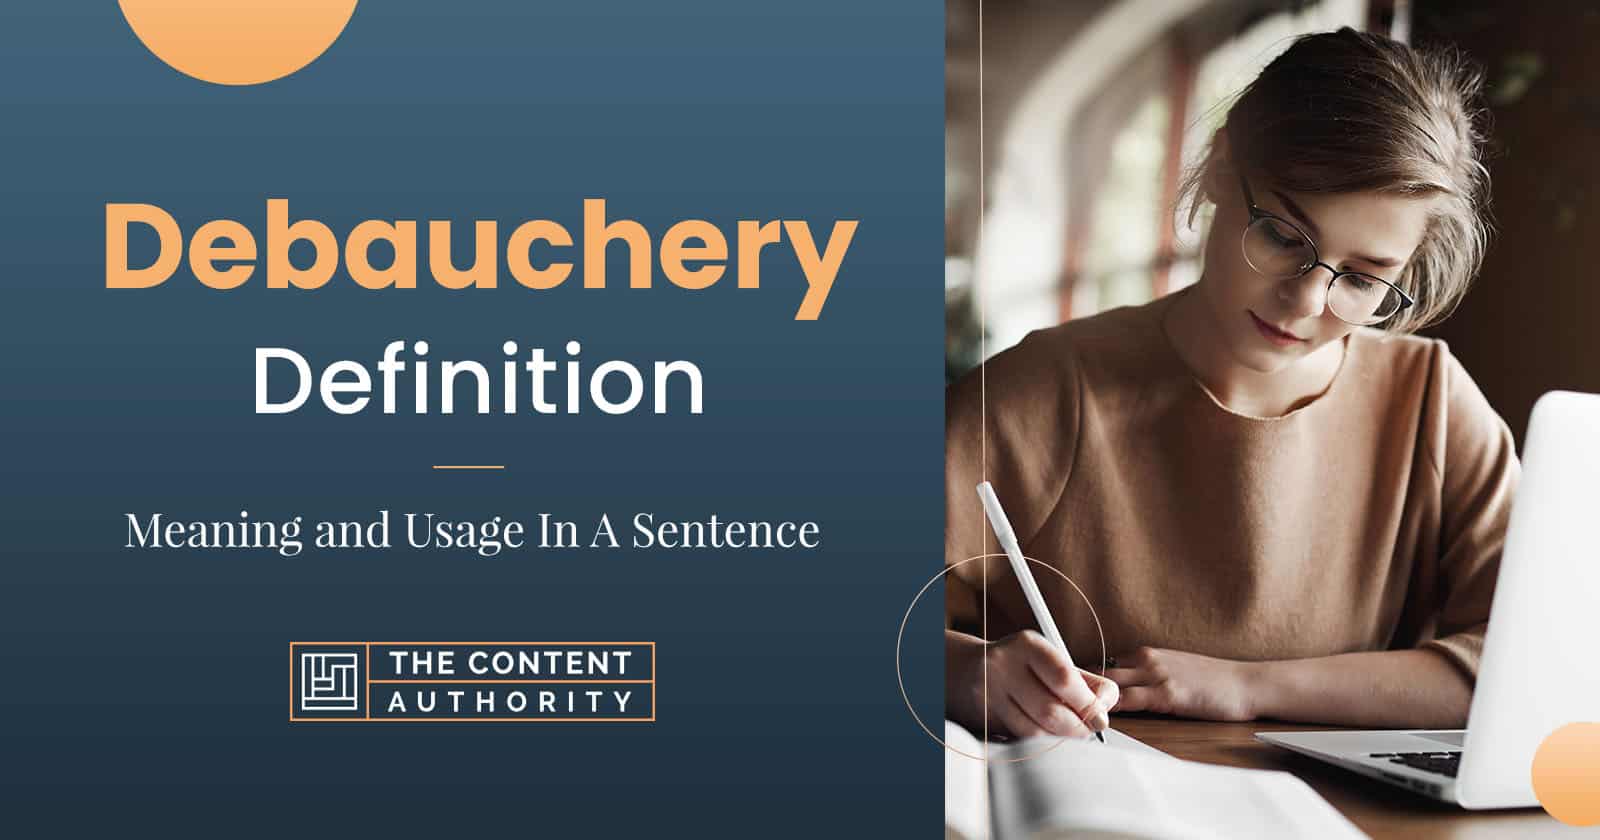 Debauchery Definition – Meaning and Usage in a Sentence